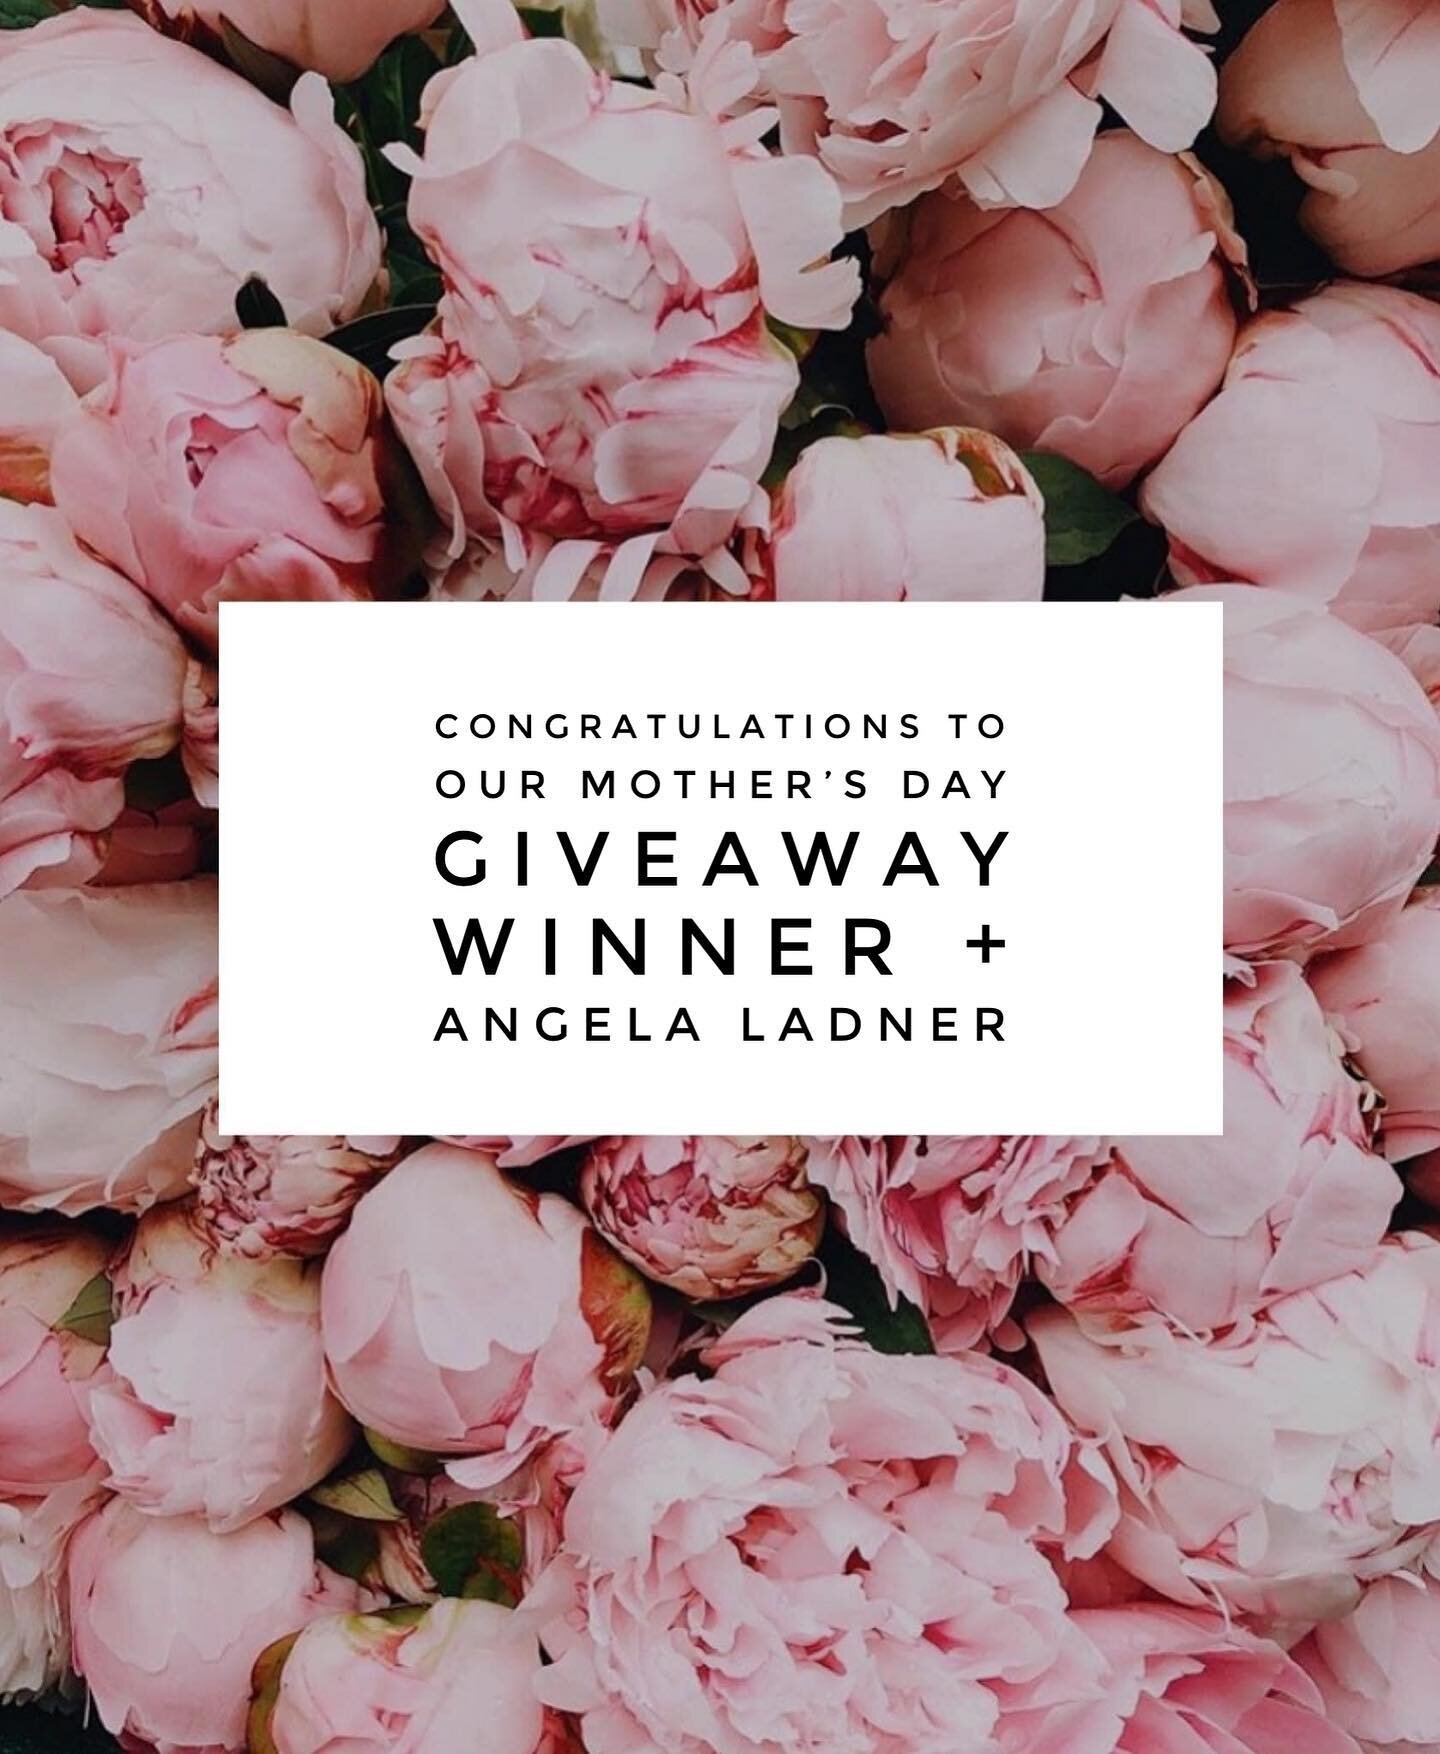 Happy Mother&rsquo;s Day Houston County! 💐

We&rsquo;re sharing our Mother&rsquo;s Day Giveaway Winner! ✨

Congratulations to Angela Ladner! 🎉

And Thank You to everyone who participated in our Giveaway! 

We appreciate you! ✨

Hometown Living At I